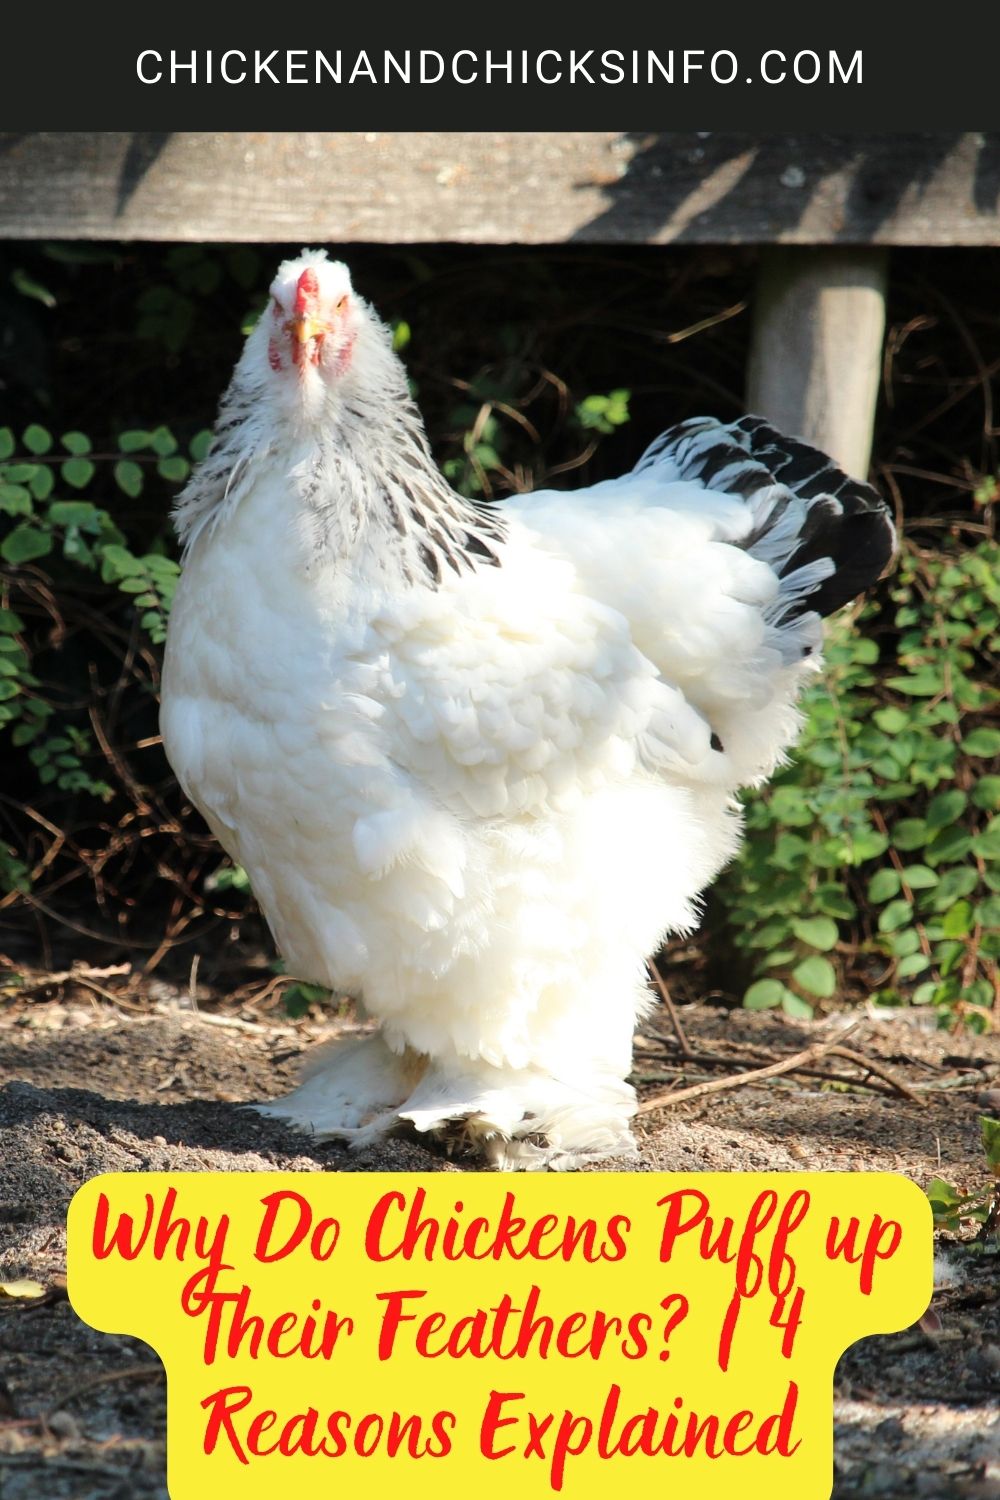 Why Do Chickens Puff up Their Feathers? | 4 Reasons Explained poster.
